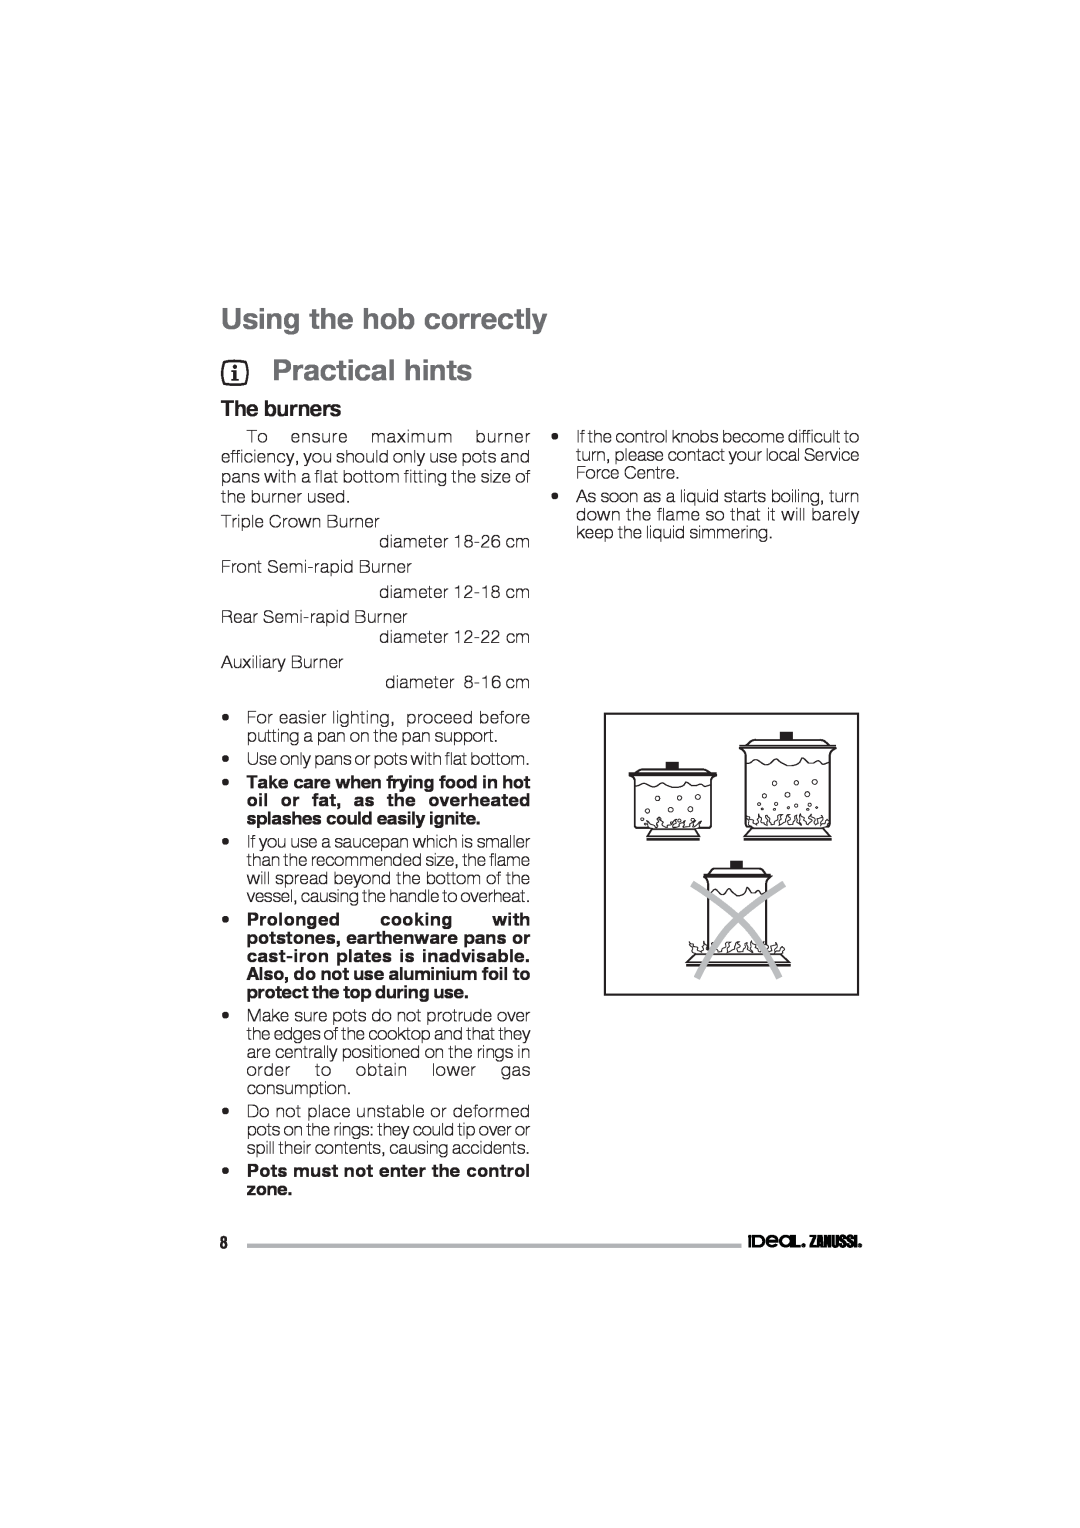 IDEAL INDUSTRIES IZGS 68 ICTX manual Using the hob correctly Practical hints, The burners 